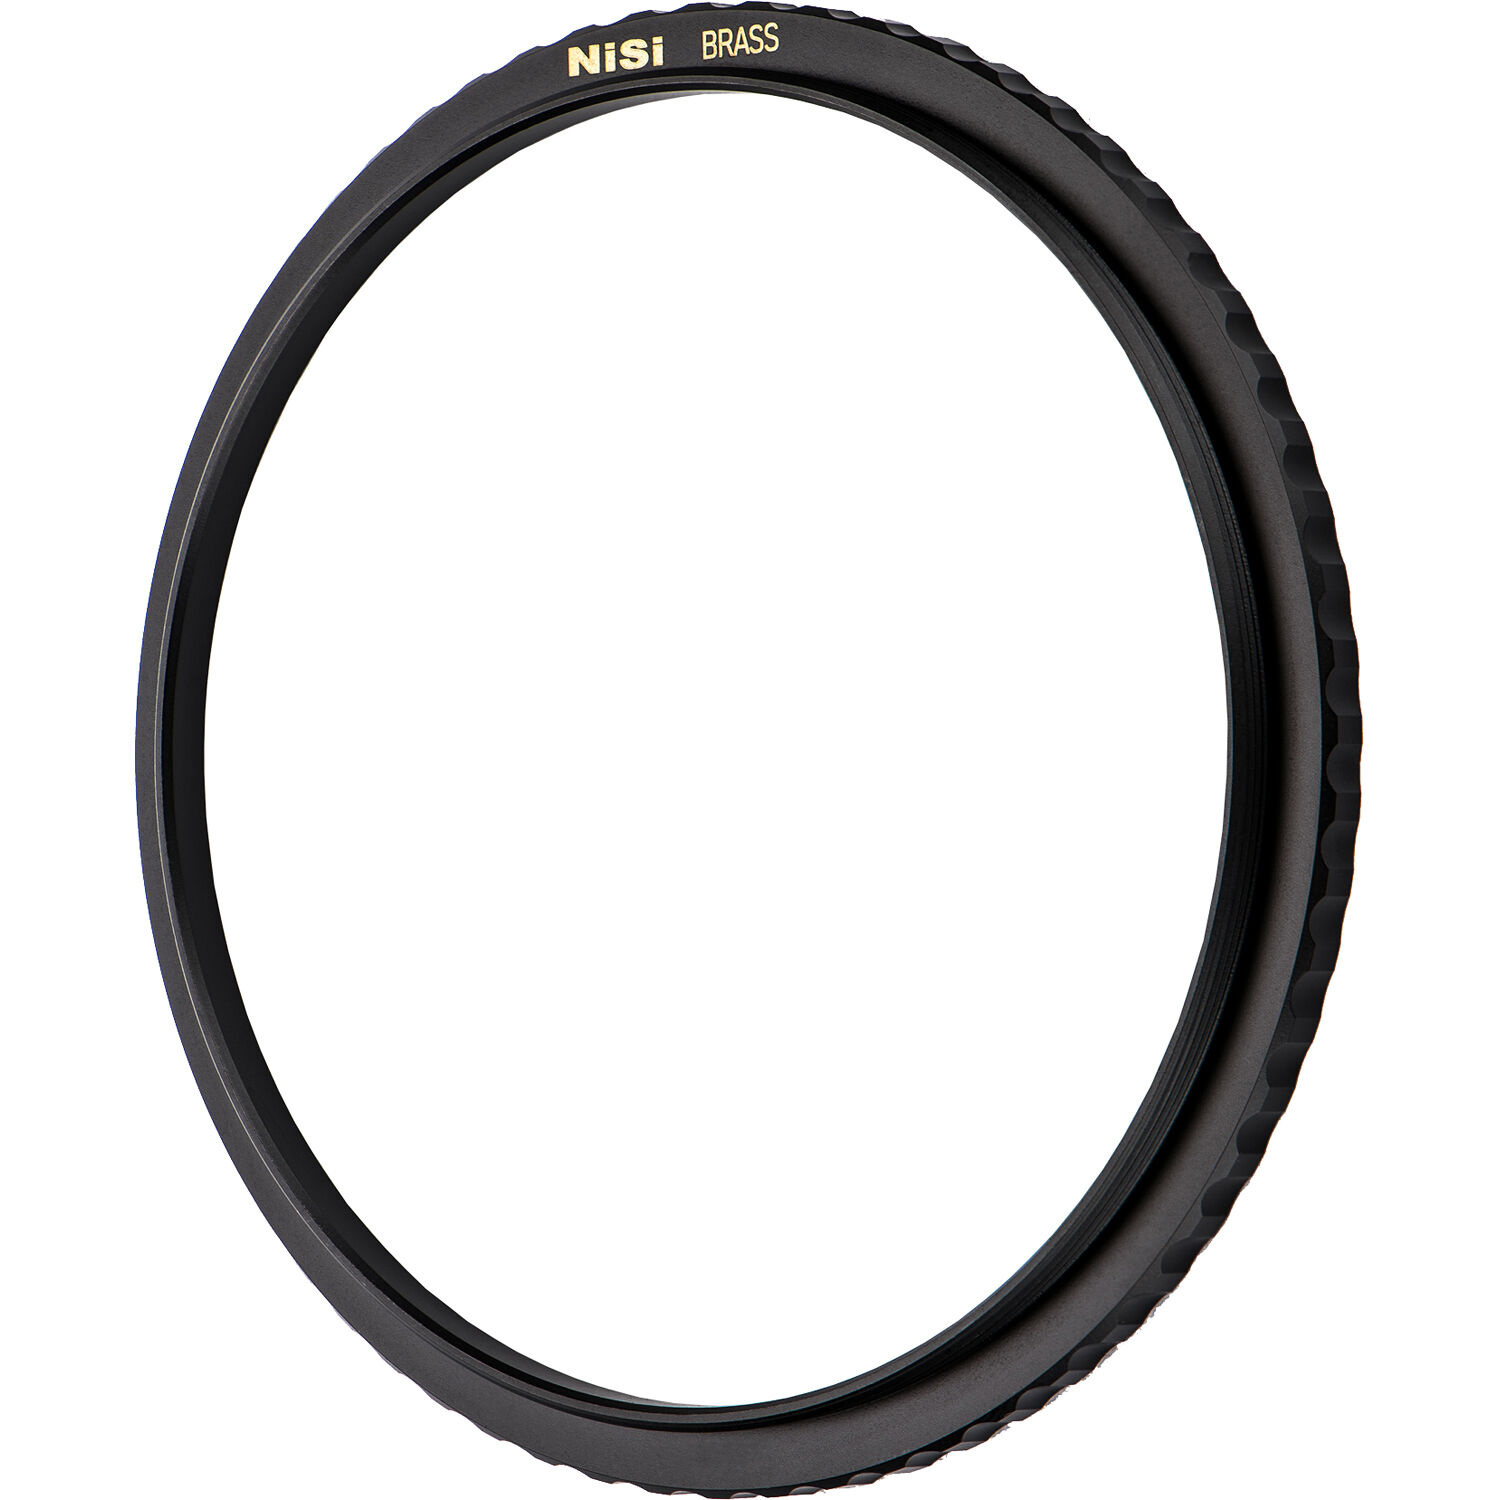 NiSi Brass Pro 58-72mm Step-Up Ring